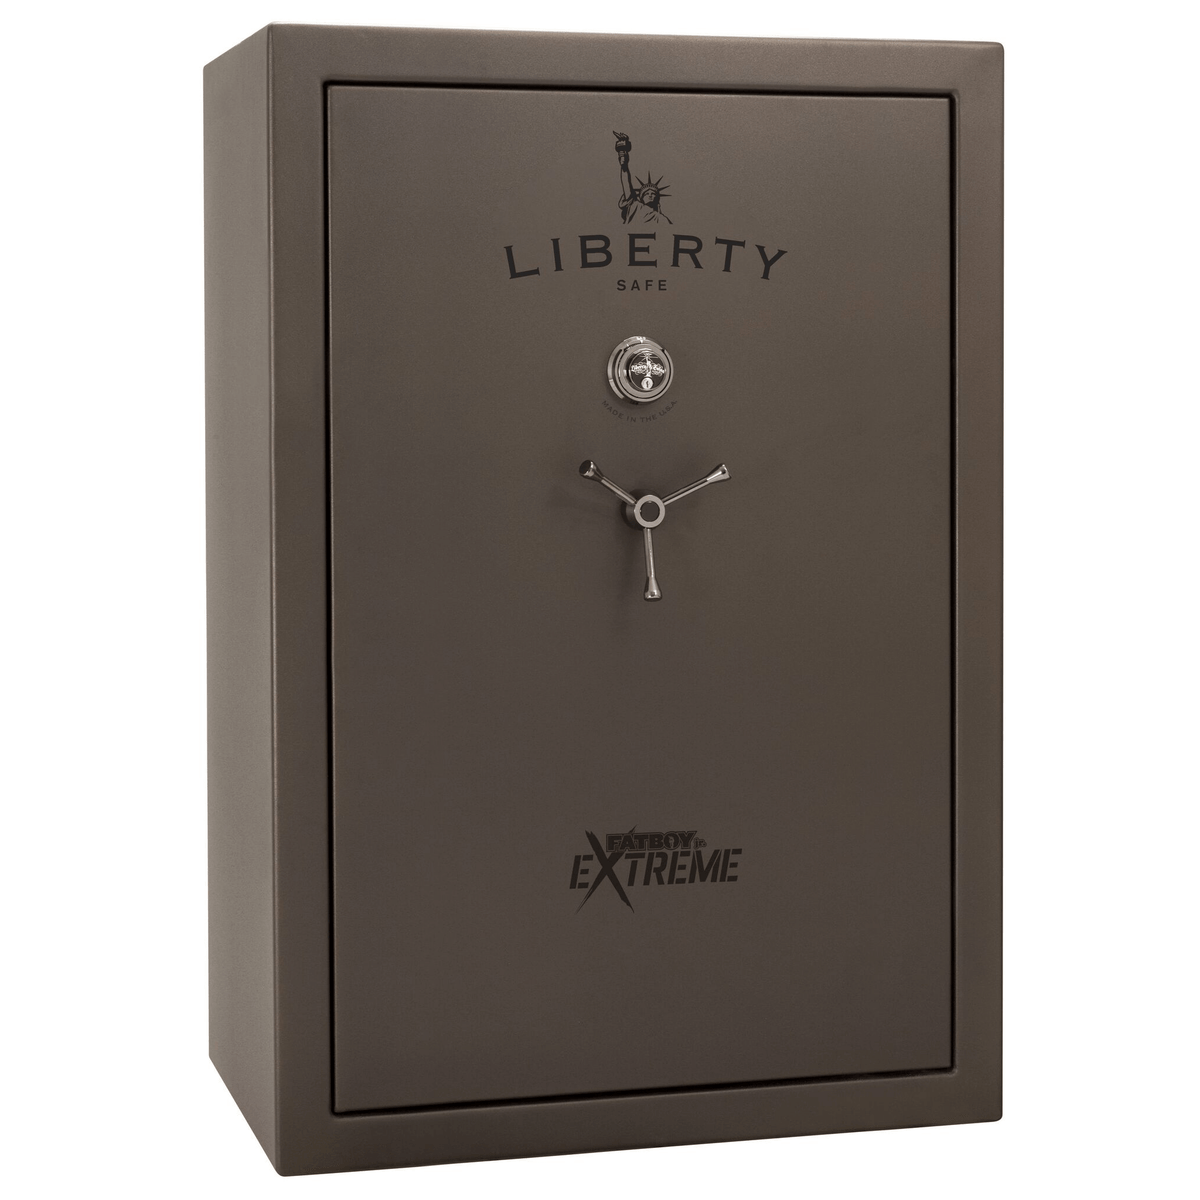 Fatboy Jr. Series | Level 3 Security | 75 Minute Fire Protection